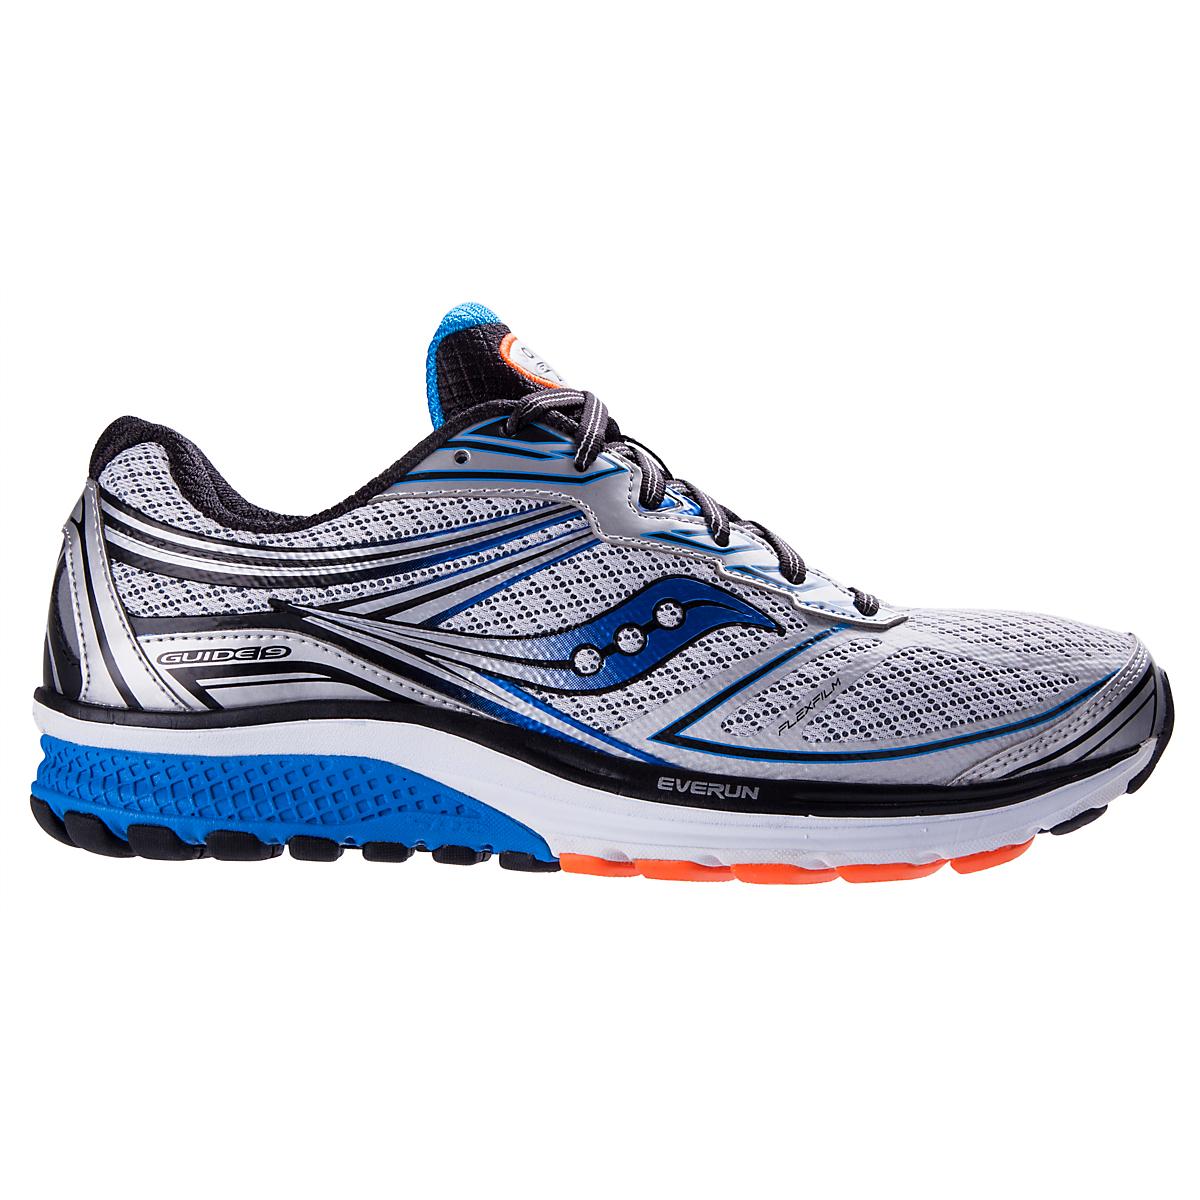 Mens Saucony Guide 9 Running Shoe at Road Runner Sports